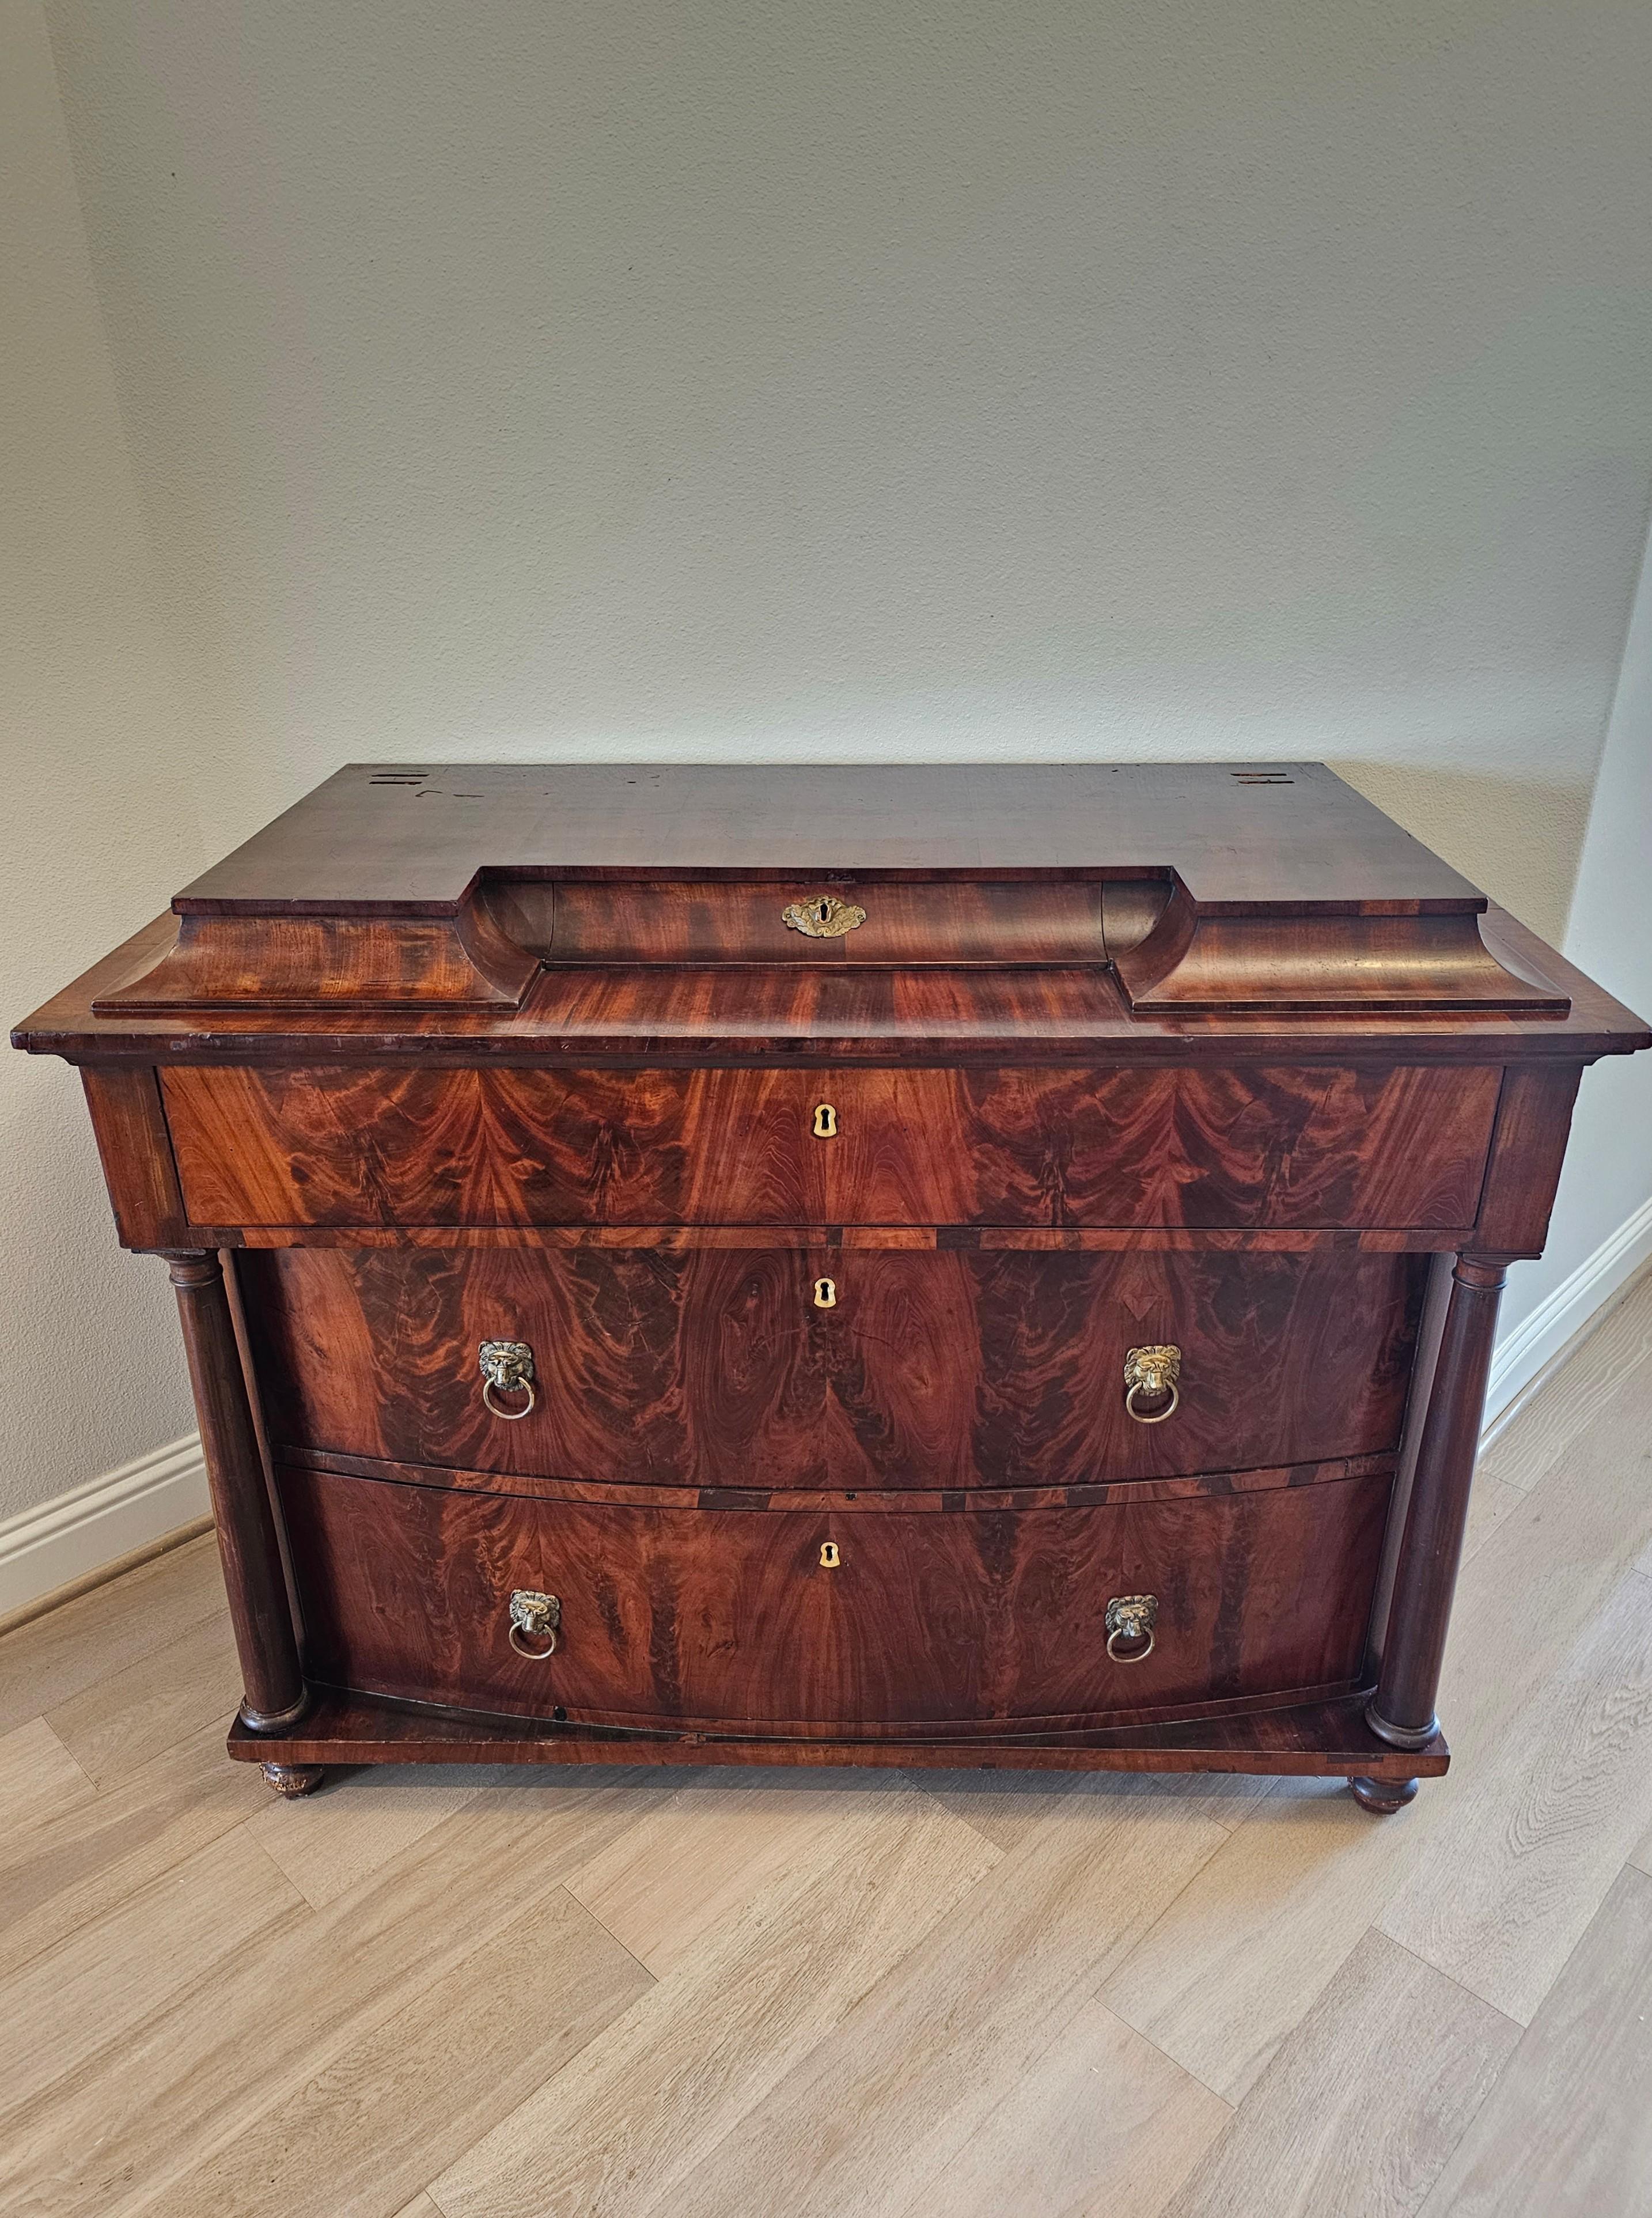 Antique Baltic Empire Biedermeier Period Flame Mahogany Chest of Drawers In Fair Condition For Sale In Forney, TX